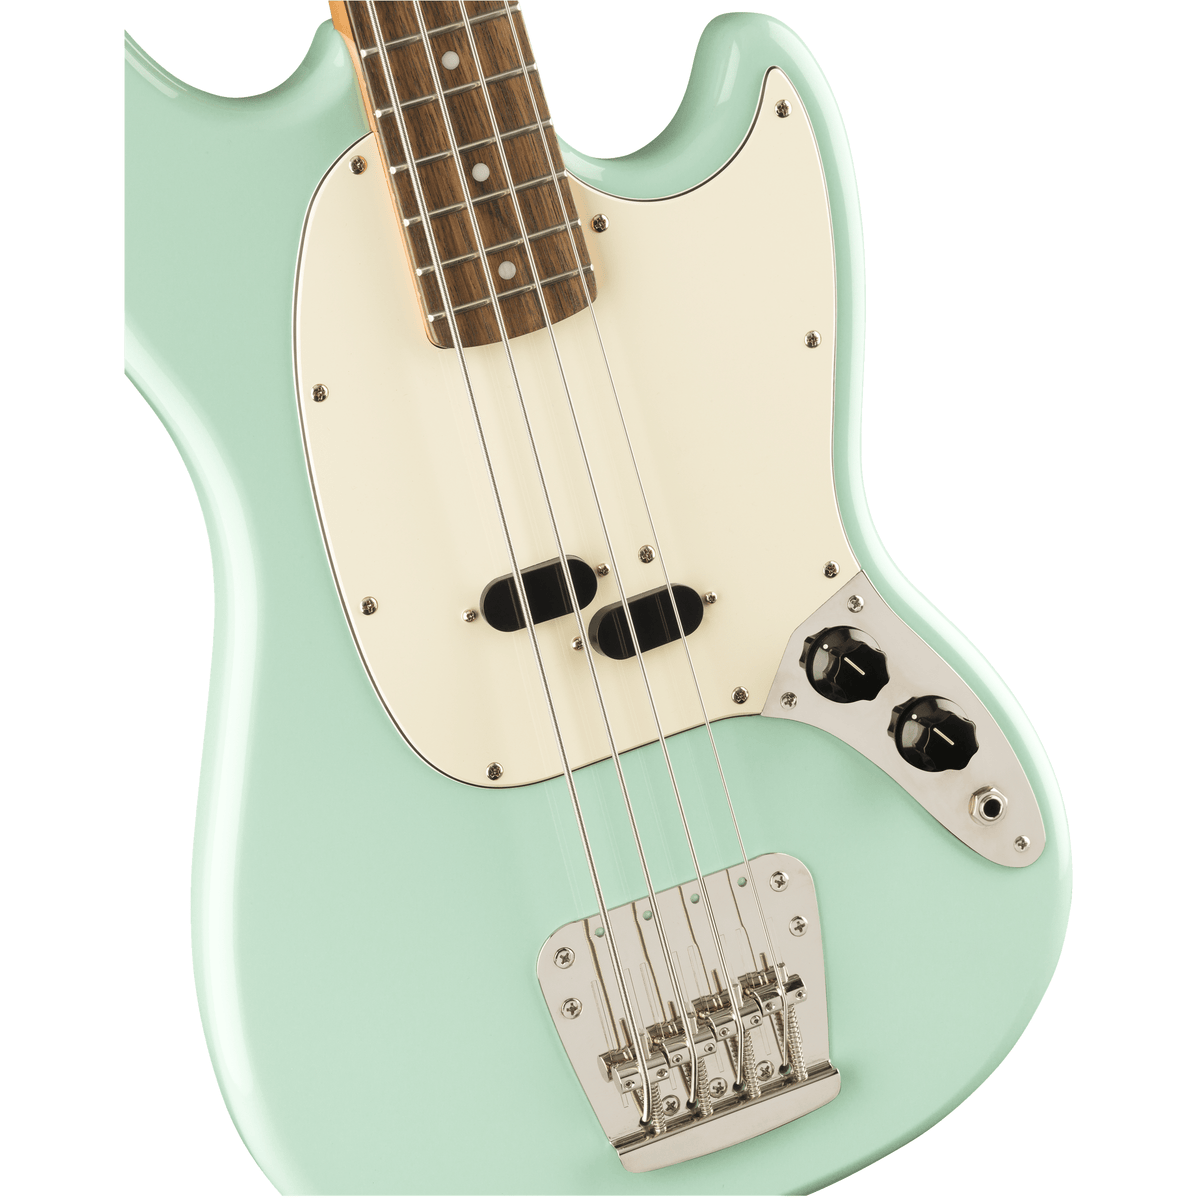 Squier Guitar Fender Squier Classic Vibe 60s Mustang Bass Surf Green - Byron Music